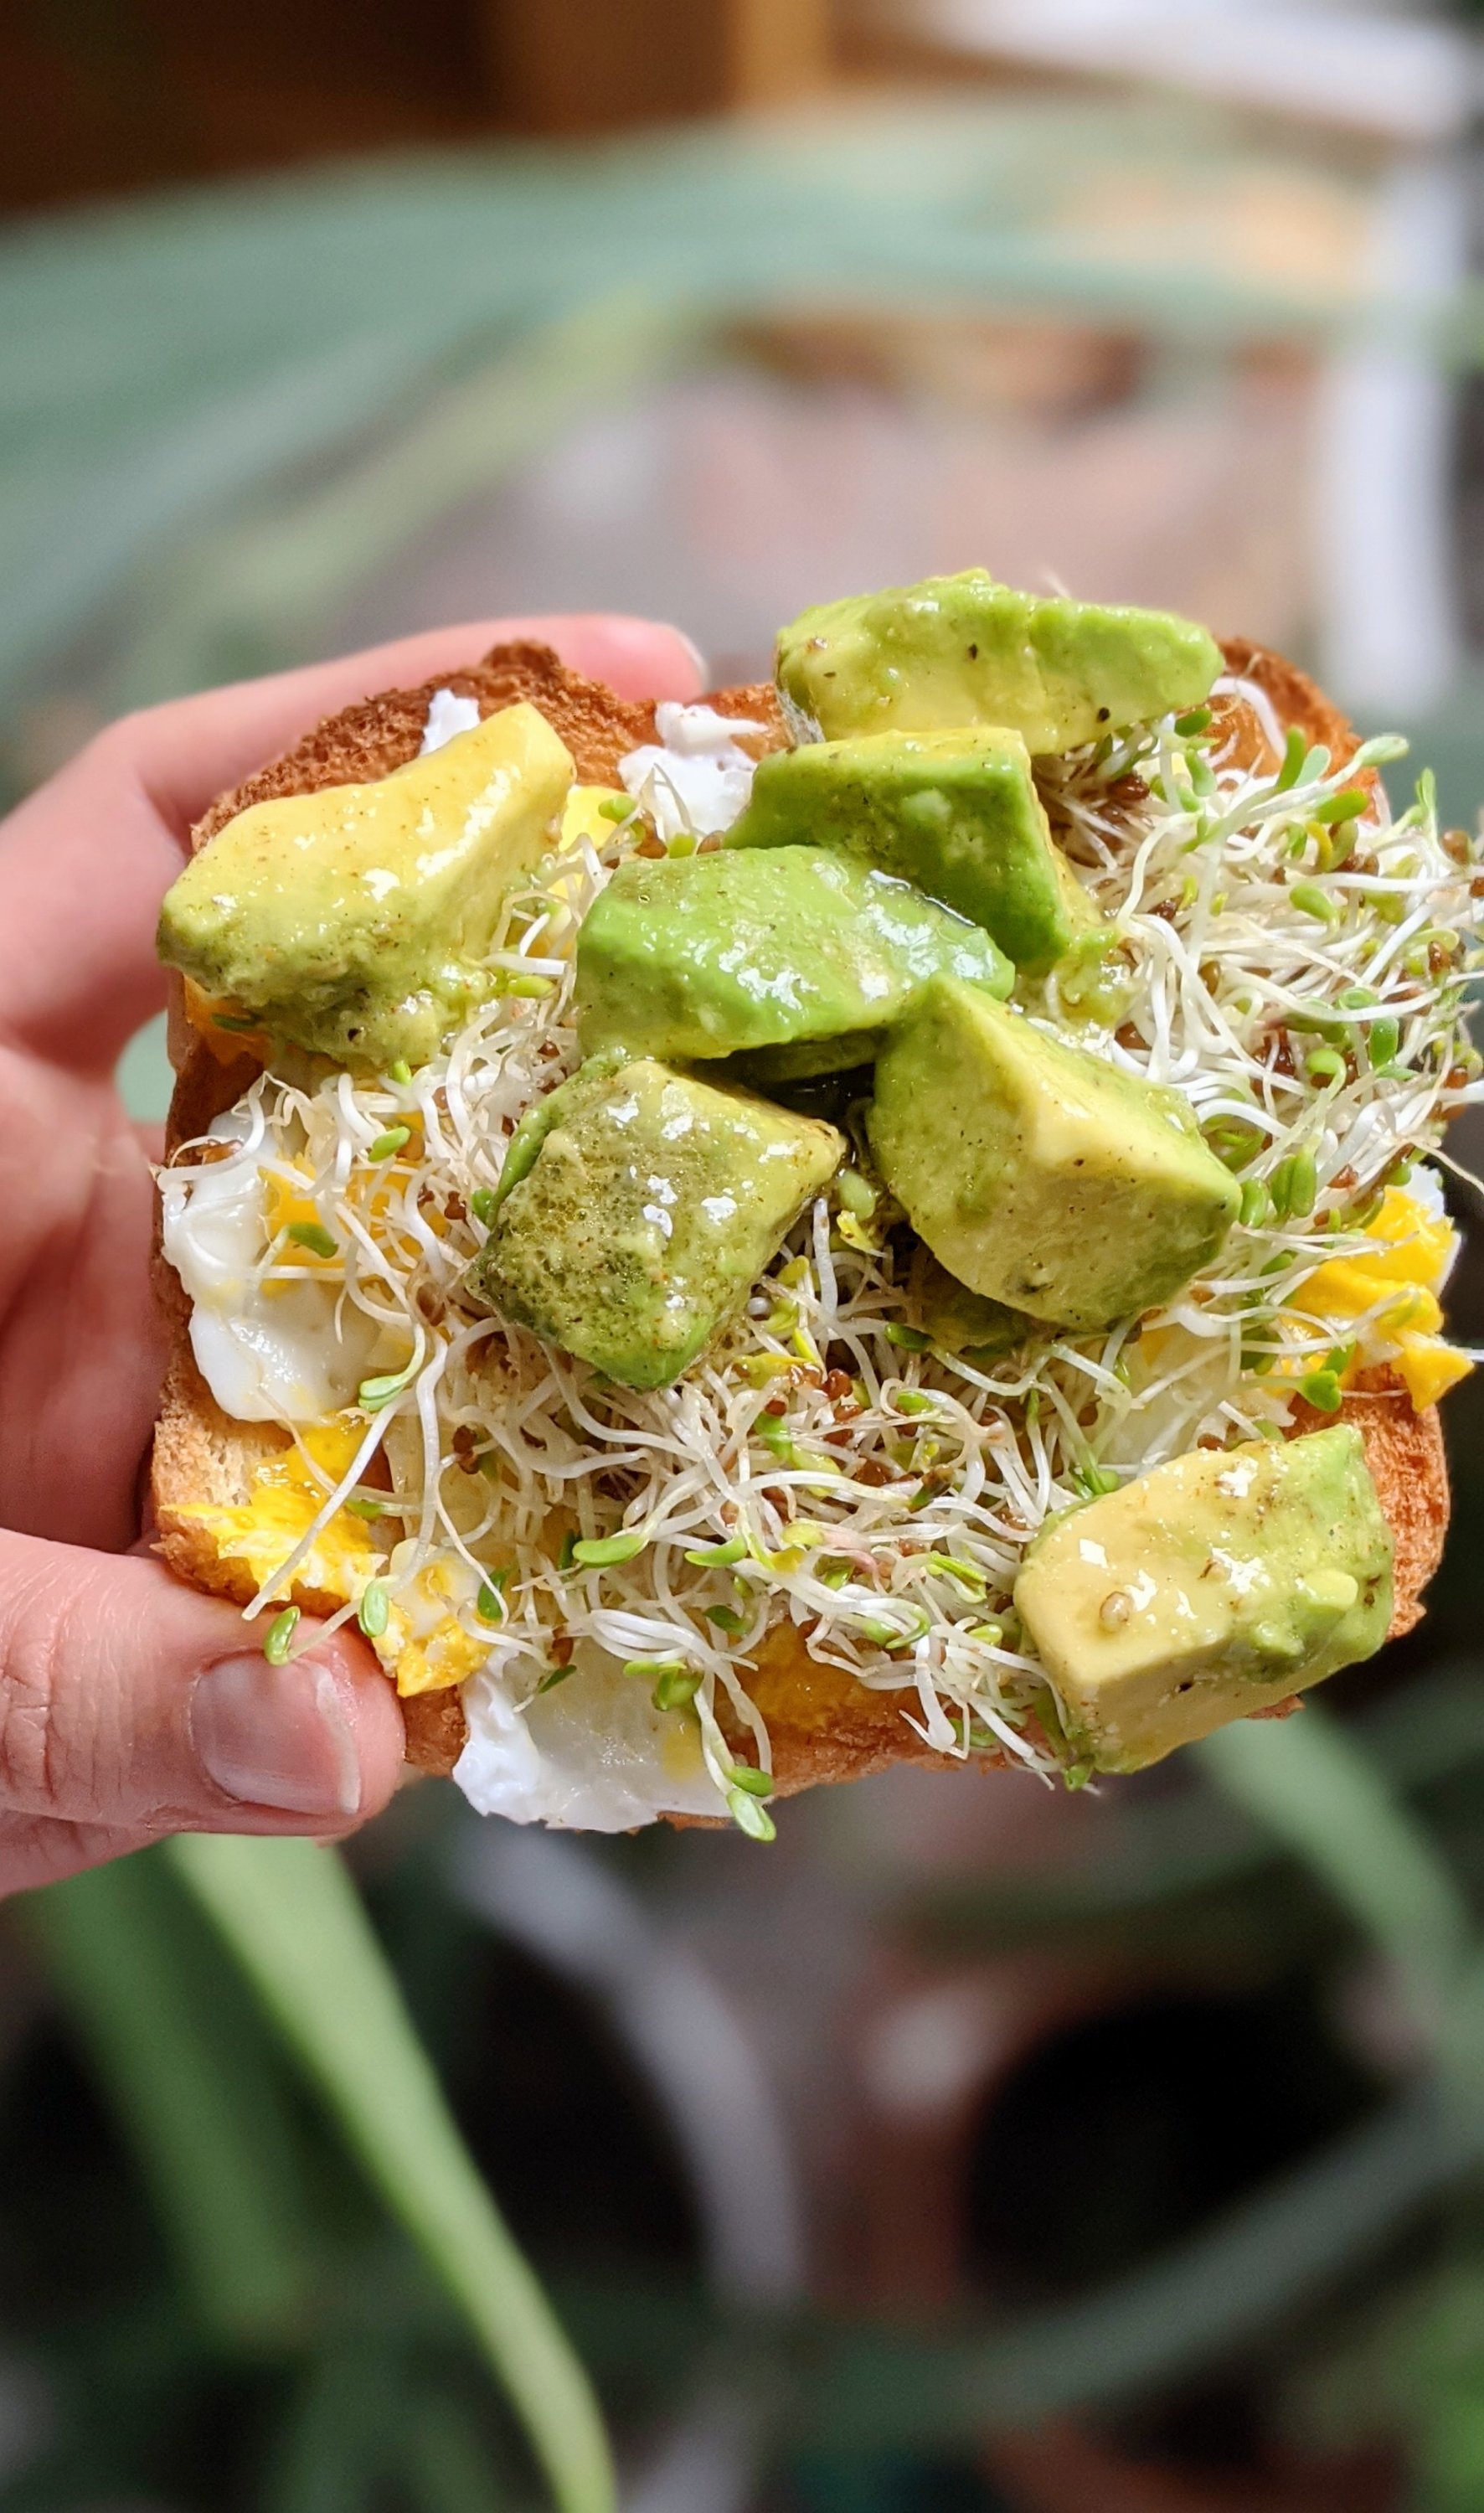 avocado salad breakfast sandwich recipe with smashed eggs and sprouts on toast with fresh marinated avocado salad for beunch recipes fancy vegan vegetarian gluten free